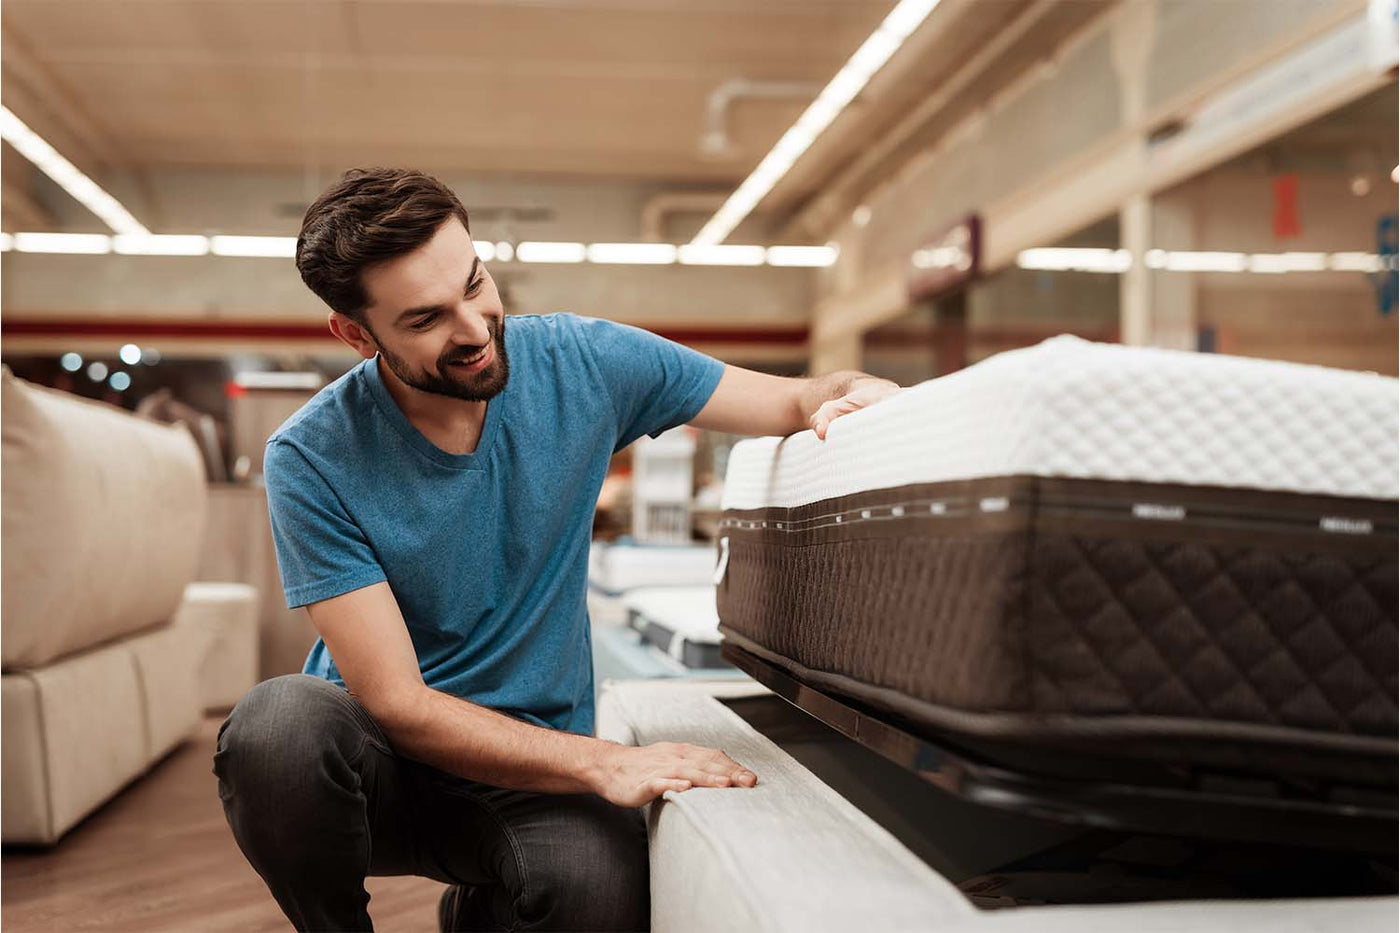 Replacing Your Mattress 101: How Often & How To Tell